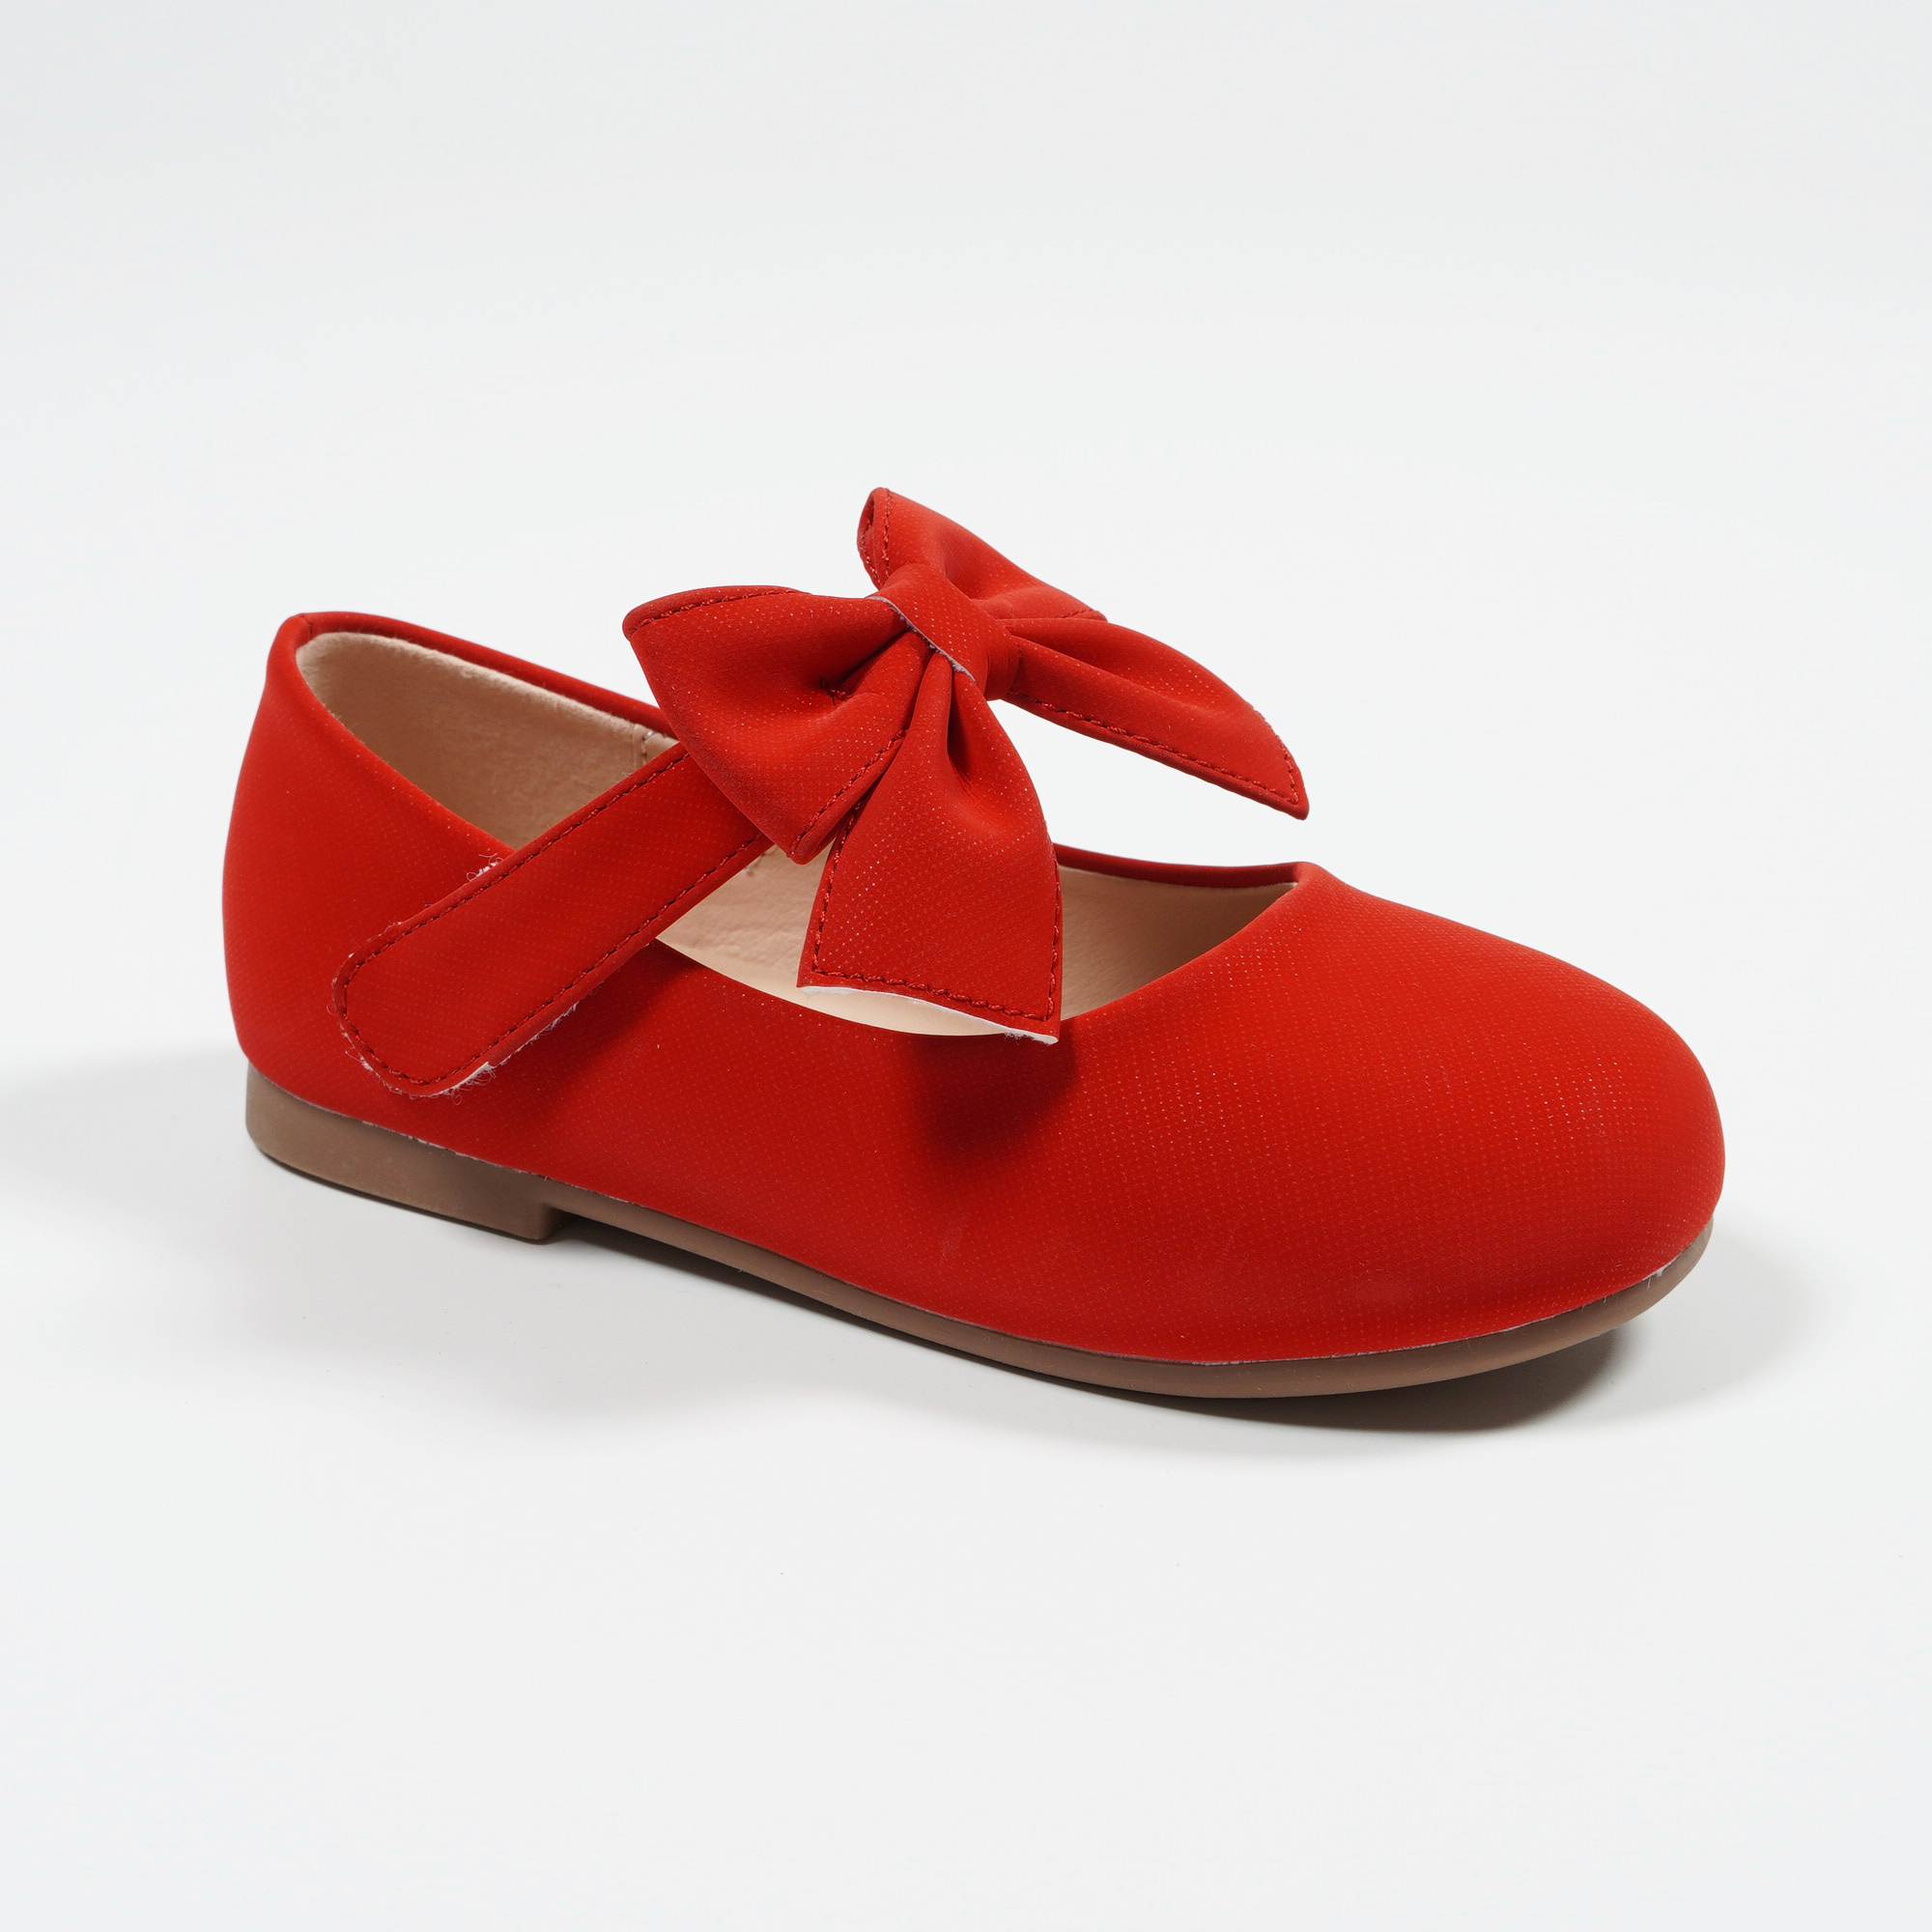 Pretty-Bow-Red-Princess-Shoes-Nikoofly-High-Quality-Velcro-Dress-Shoes-for-Girls-HSA5602K-22-red